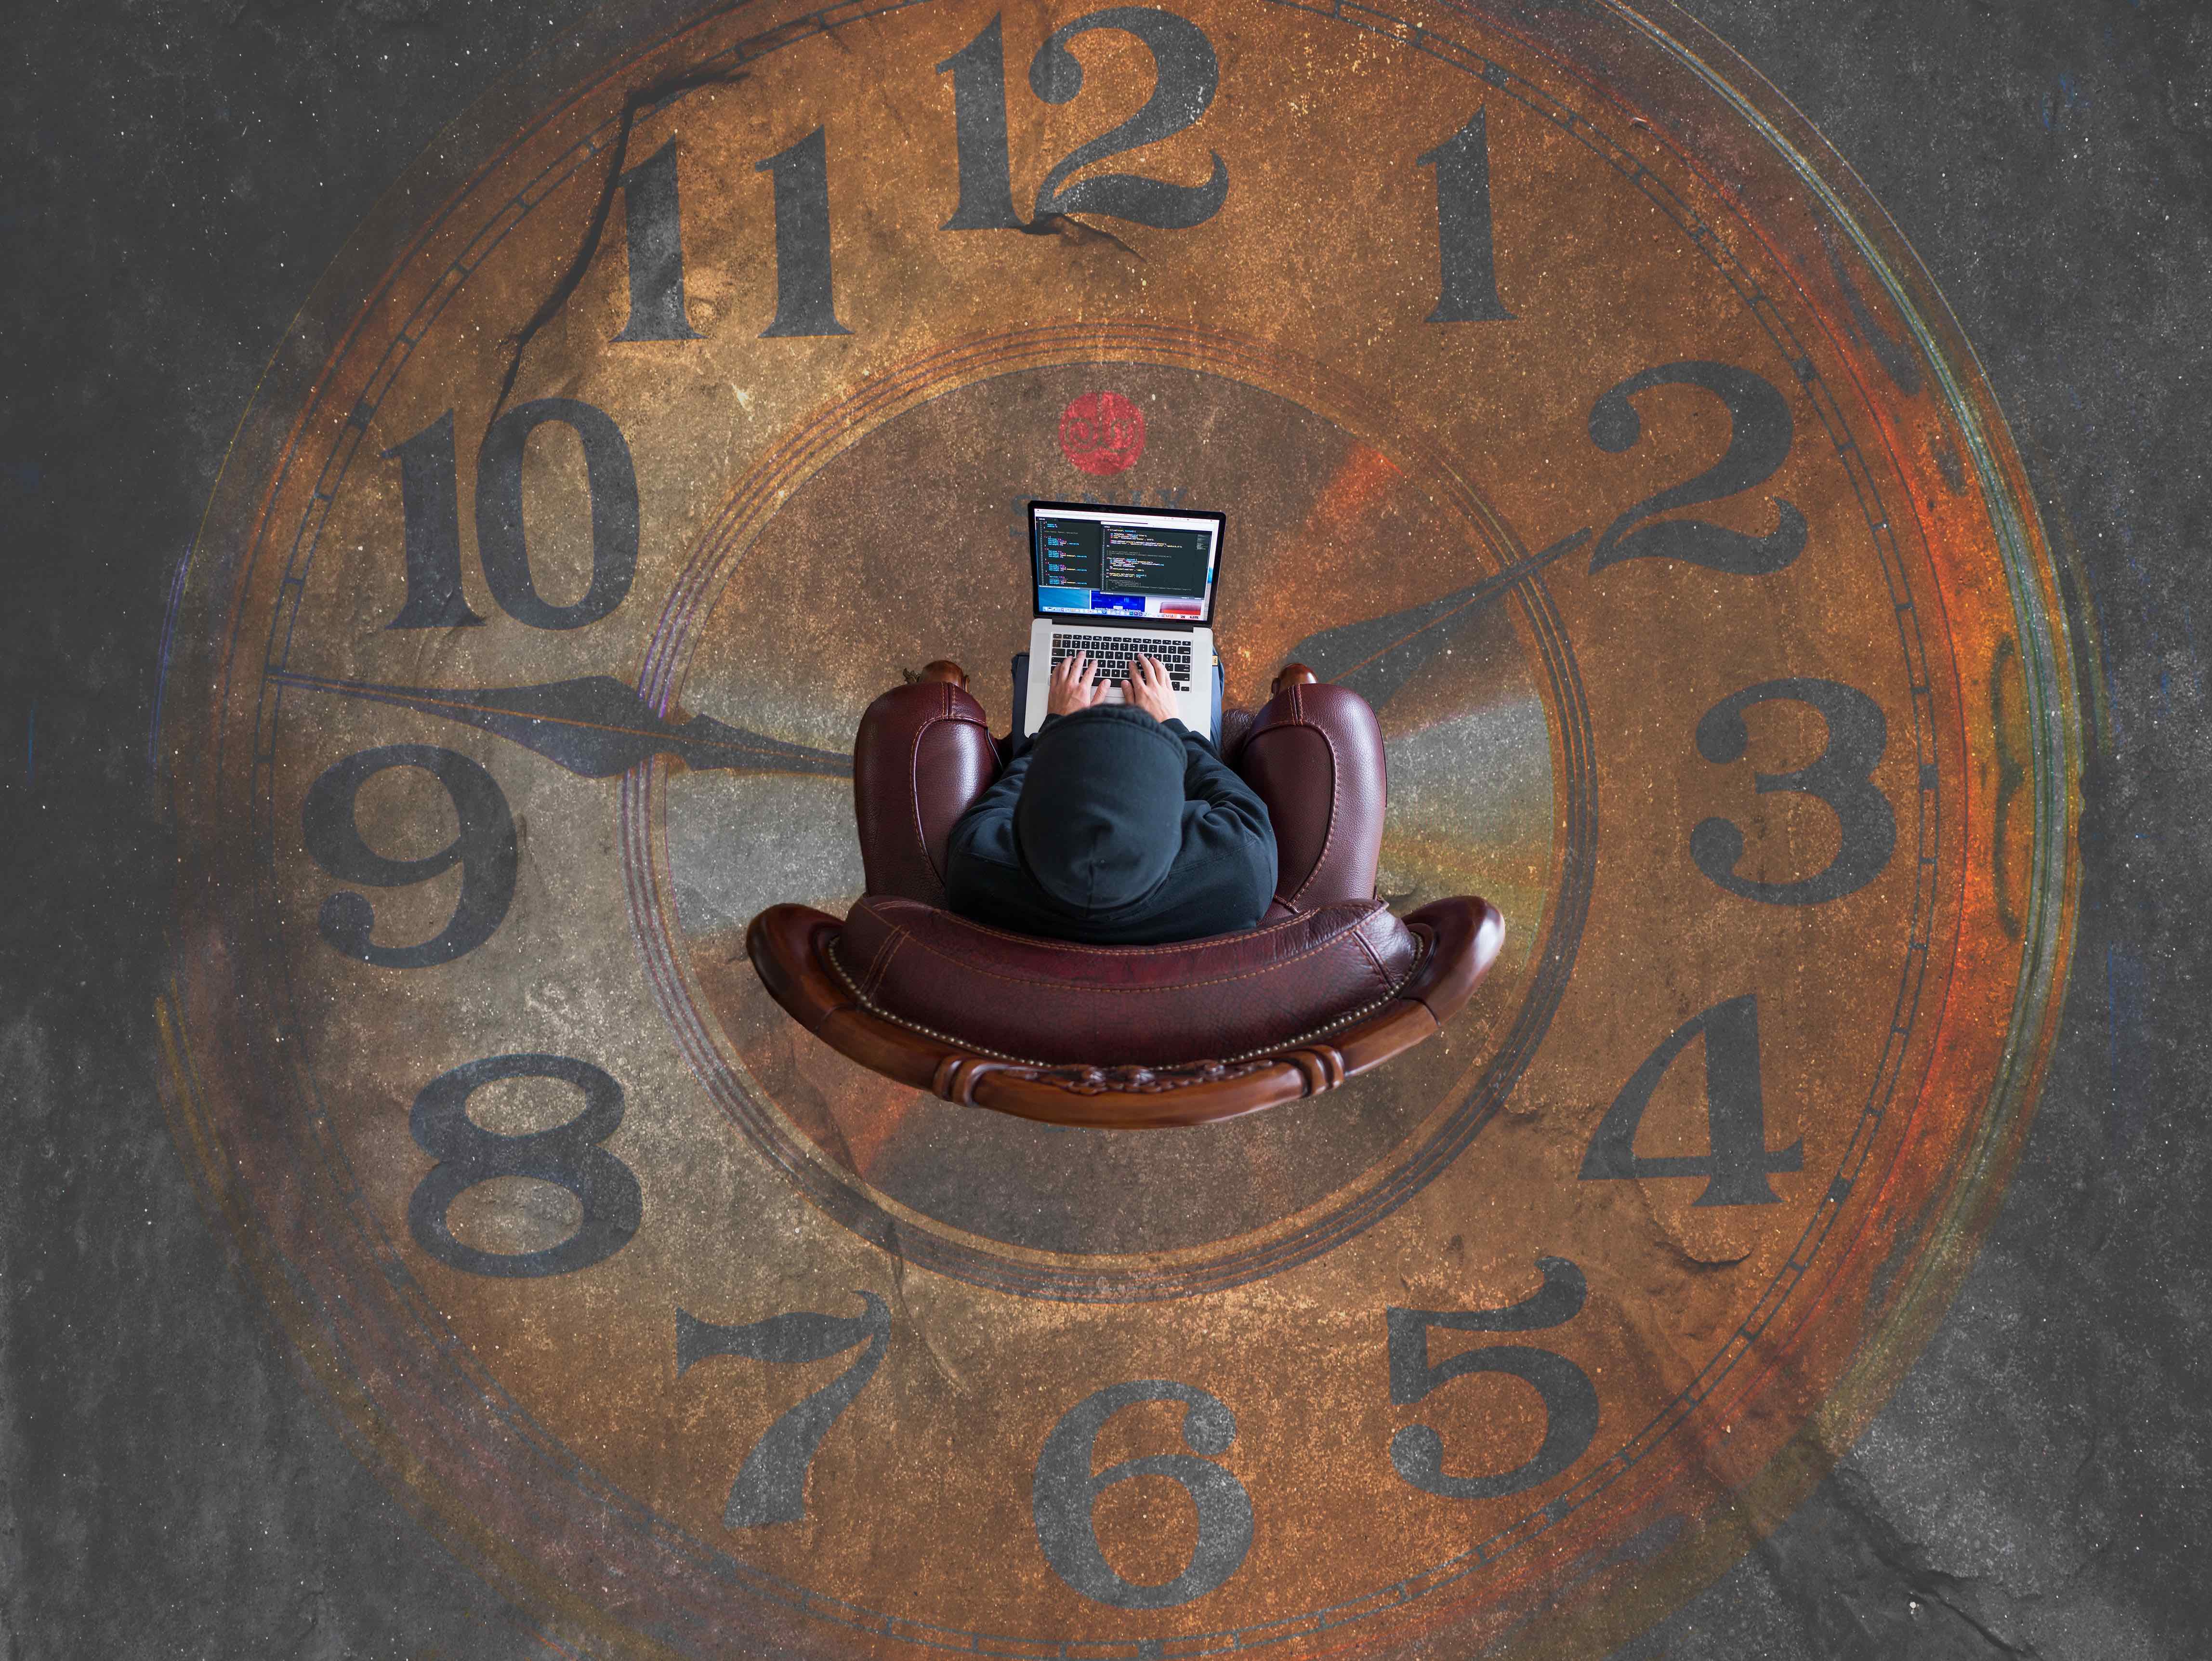 Man sitting in a chair, working on his laptop, with a painted analog clock on the floor